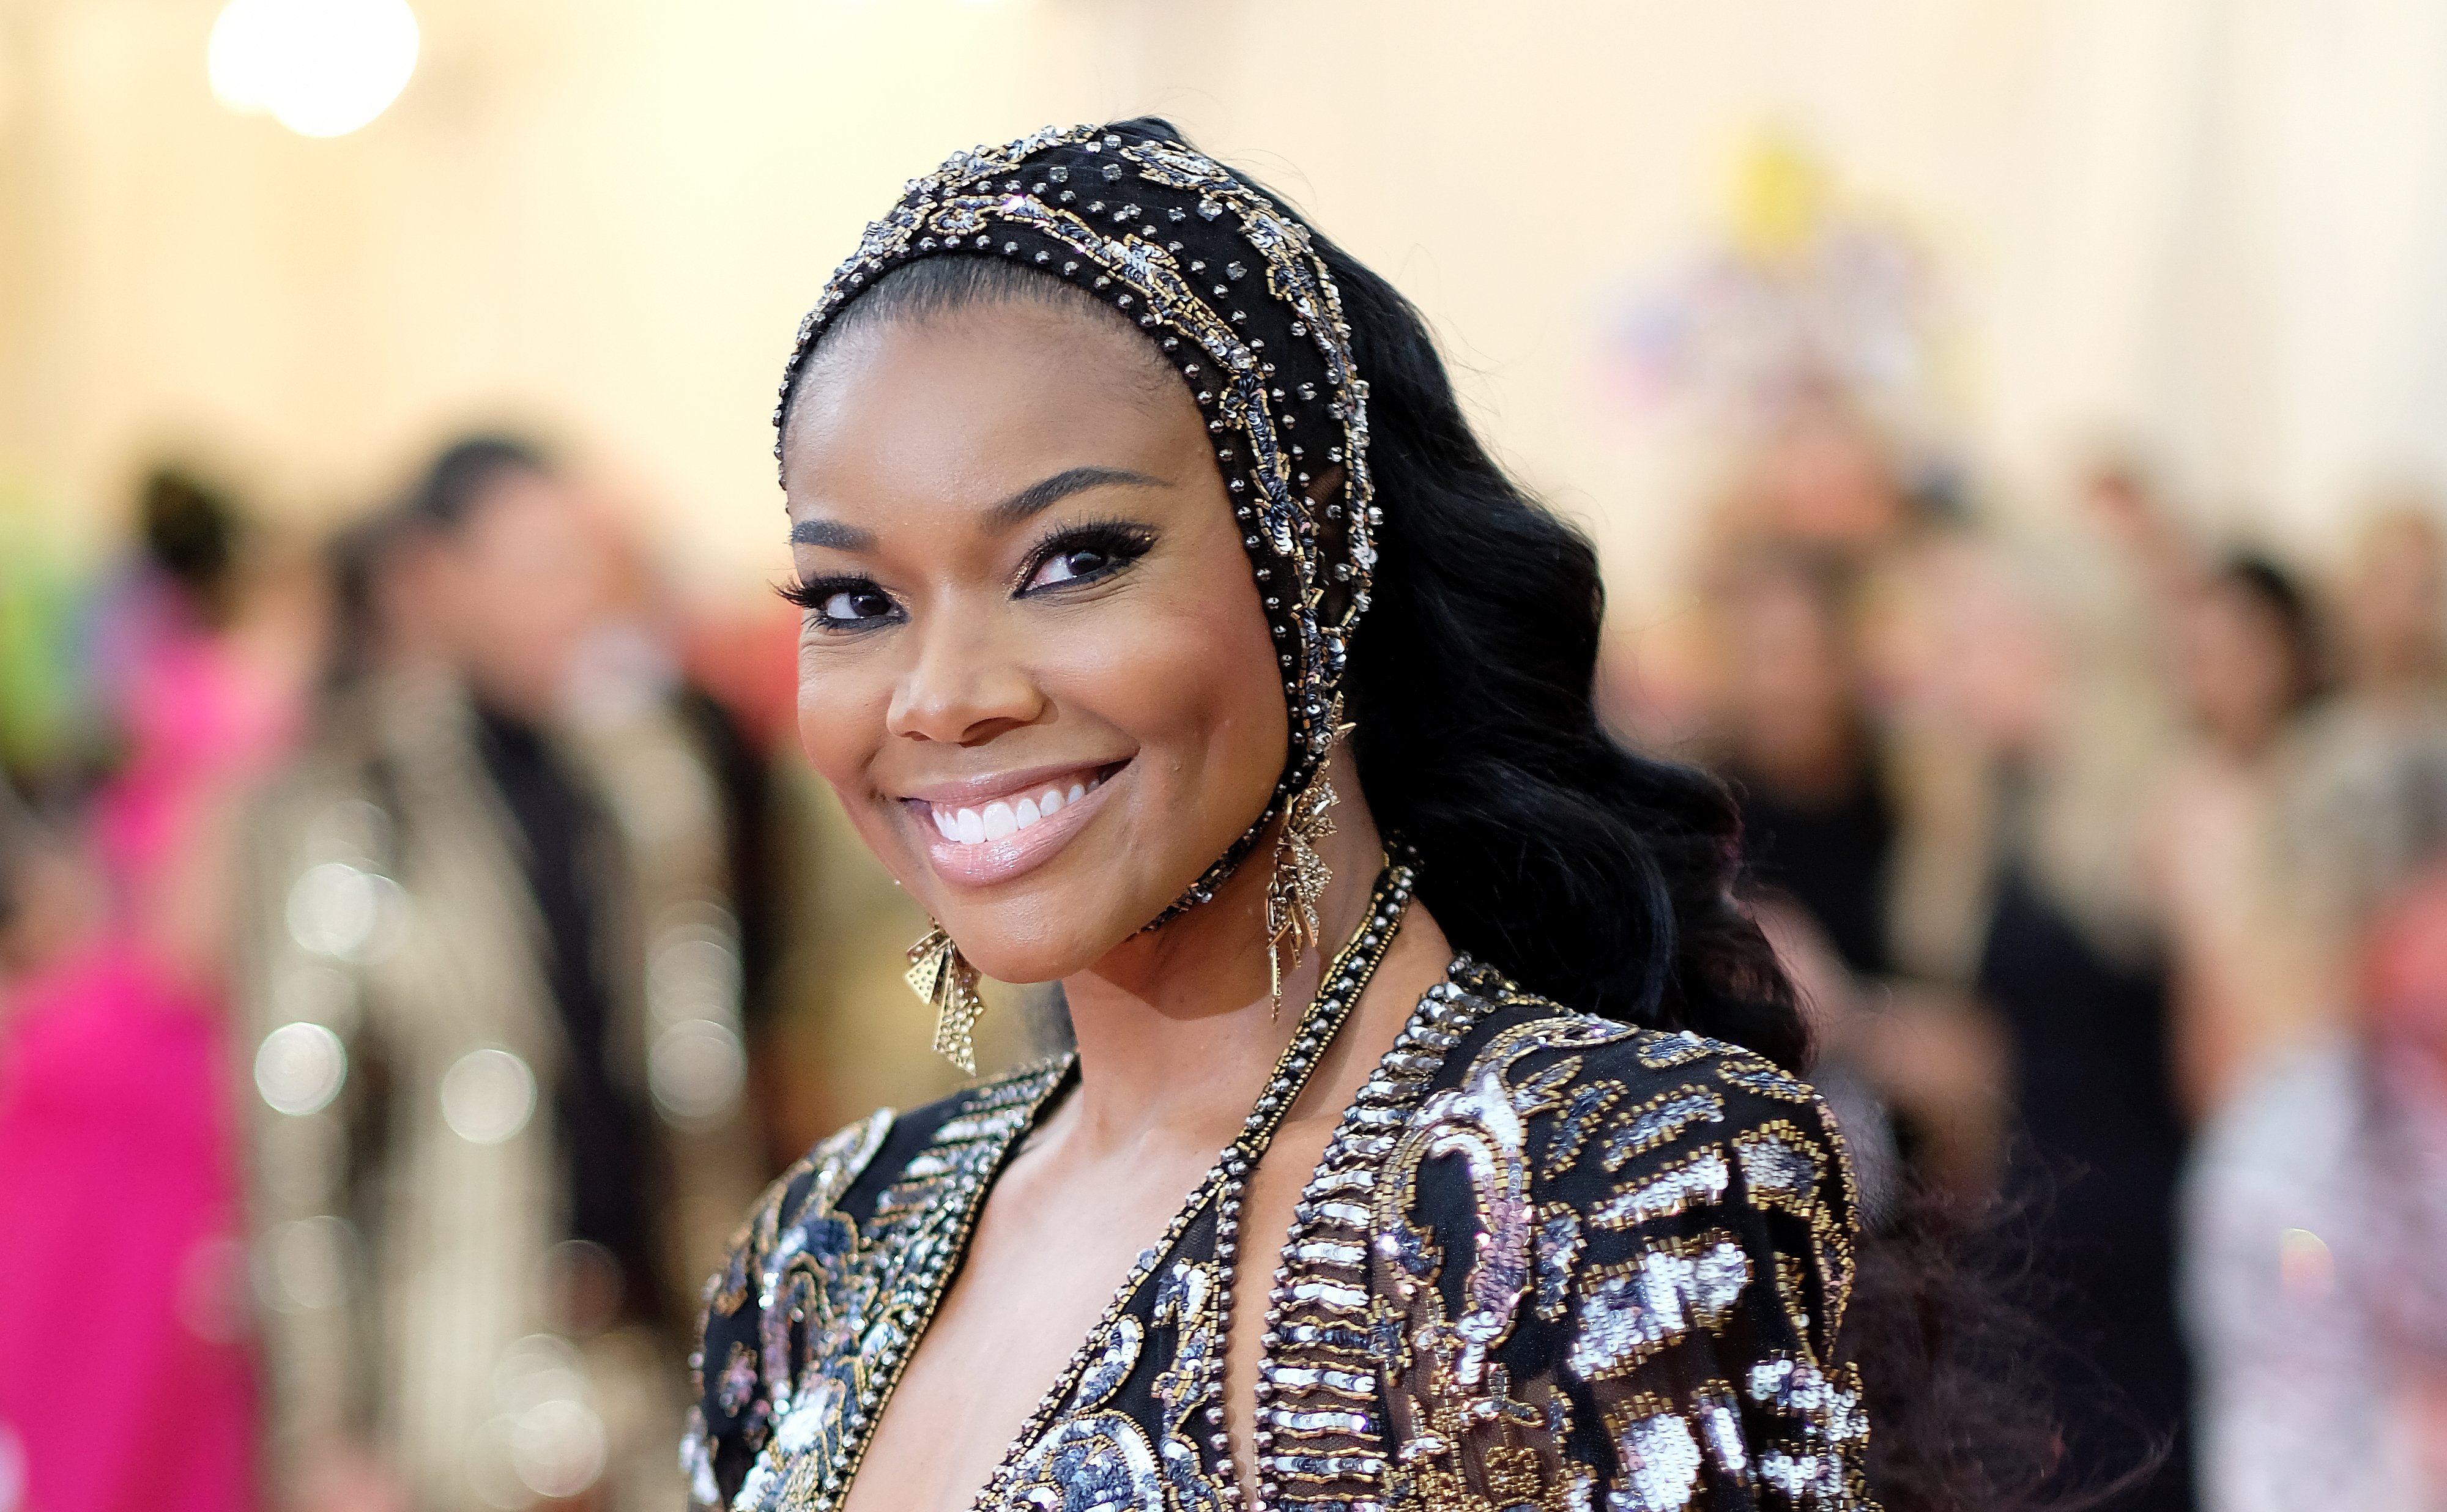 Gabrielle Union attends the 2019 Met Gala at the Metropolitan Museum of Art on May 06, 2019 in New York City.| Source: Getty Images